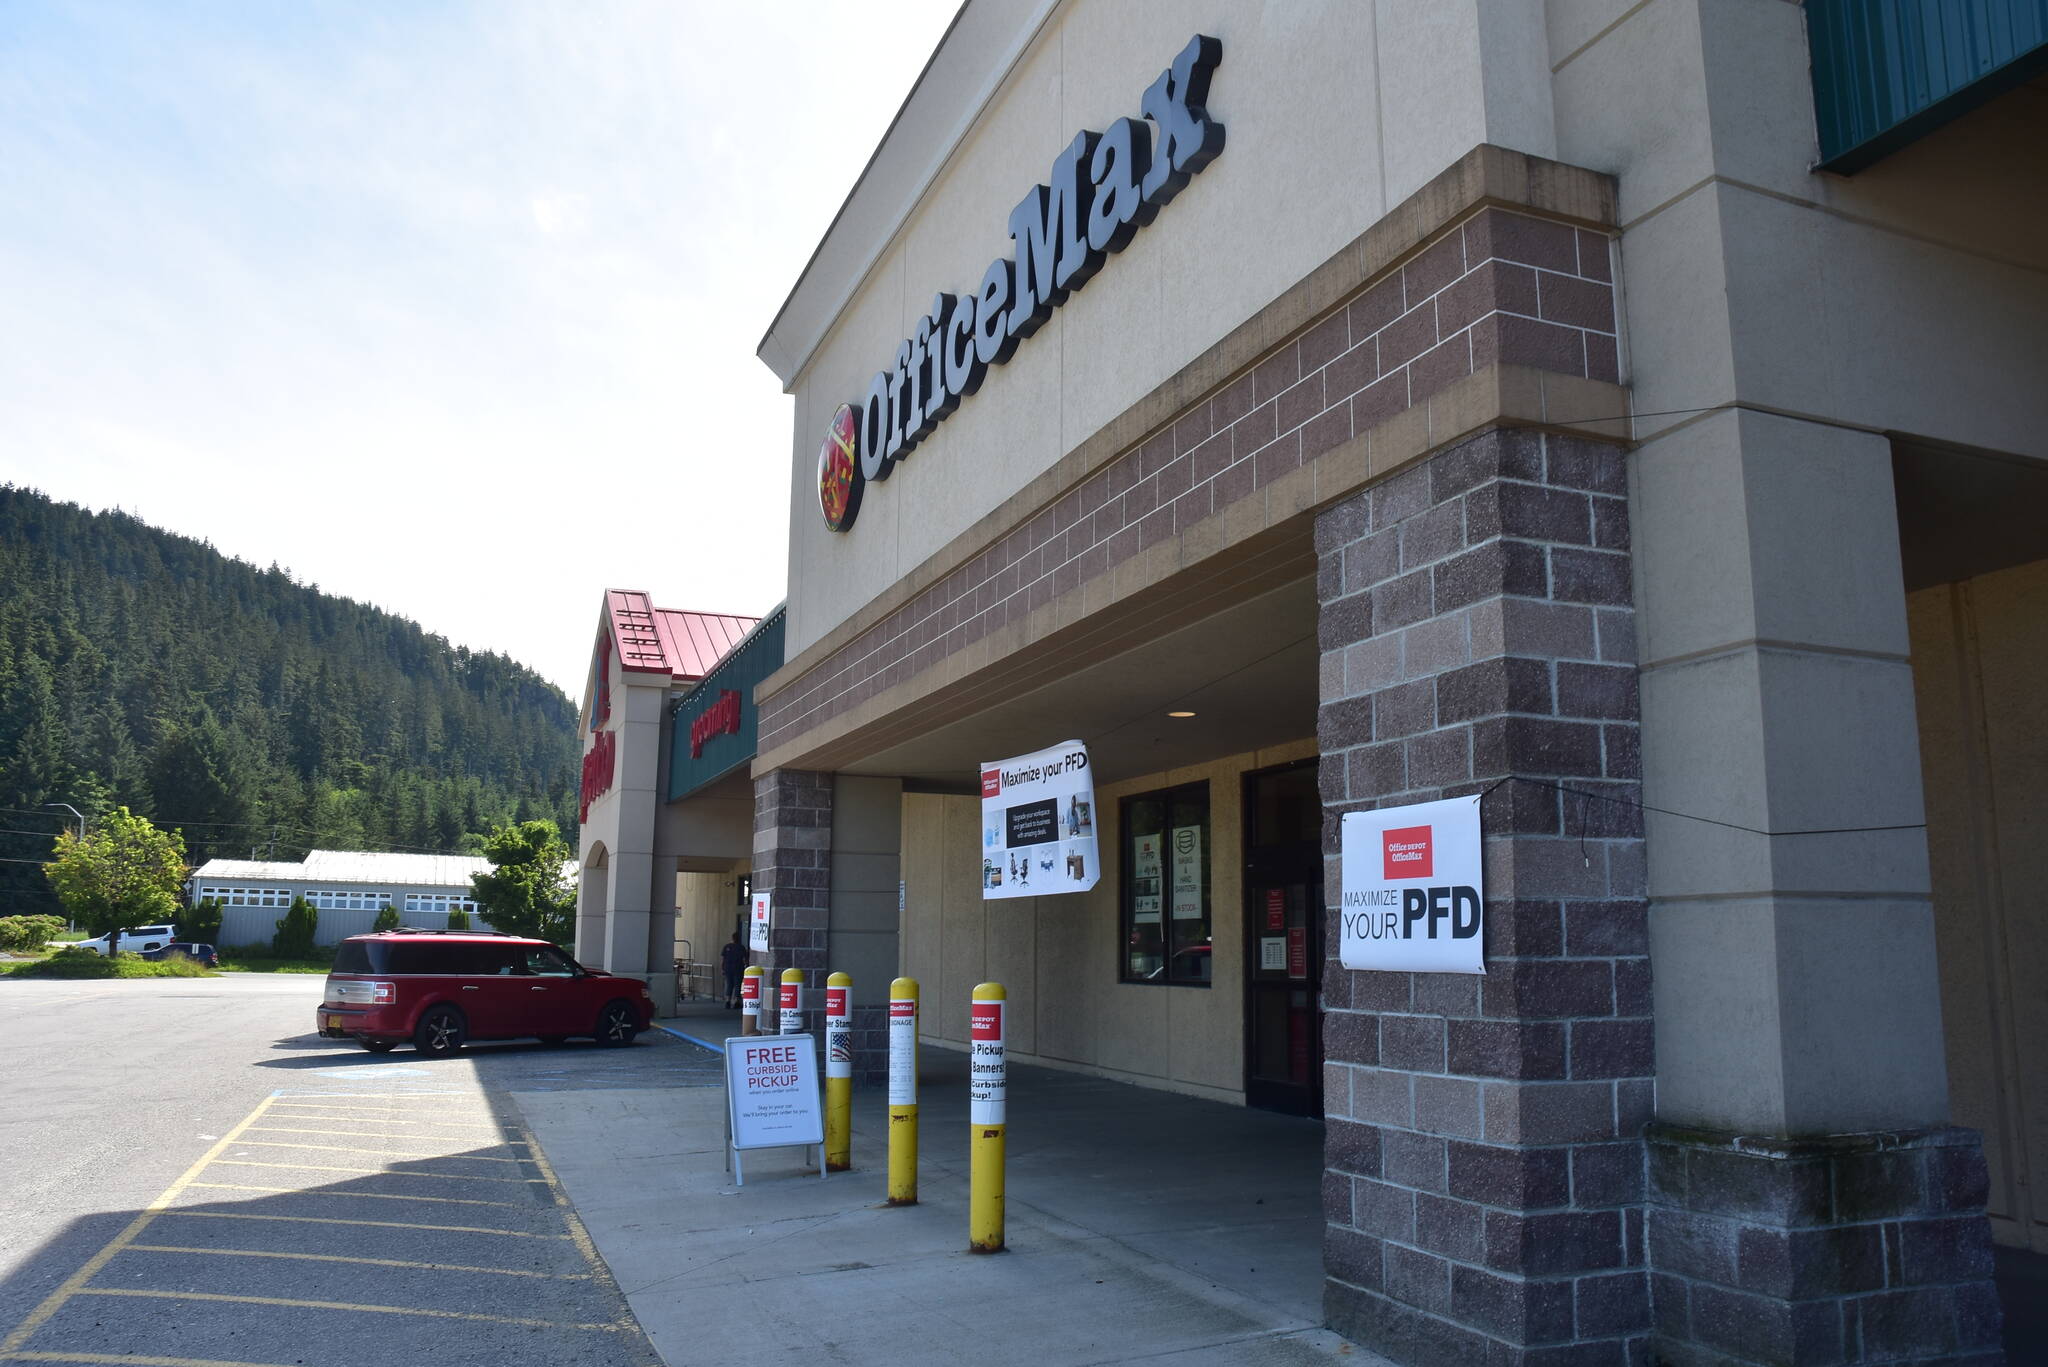 Office Max at the Nugget Mall in the Mendenhall Valley advertised Permanent Fund dividend sales in July 2020. Alaskans have until the end of the month to apply for the PFD. (Peter Segall / Juneau Empire File)